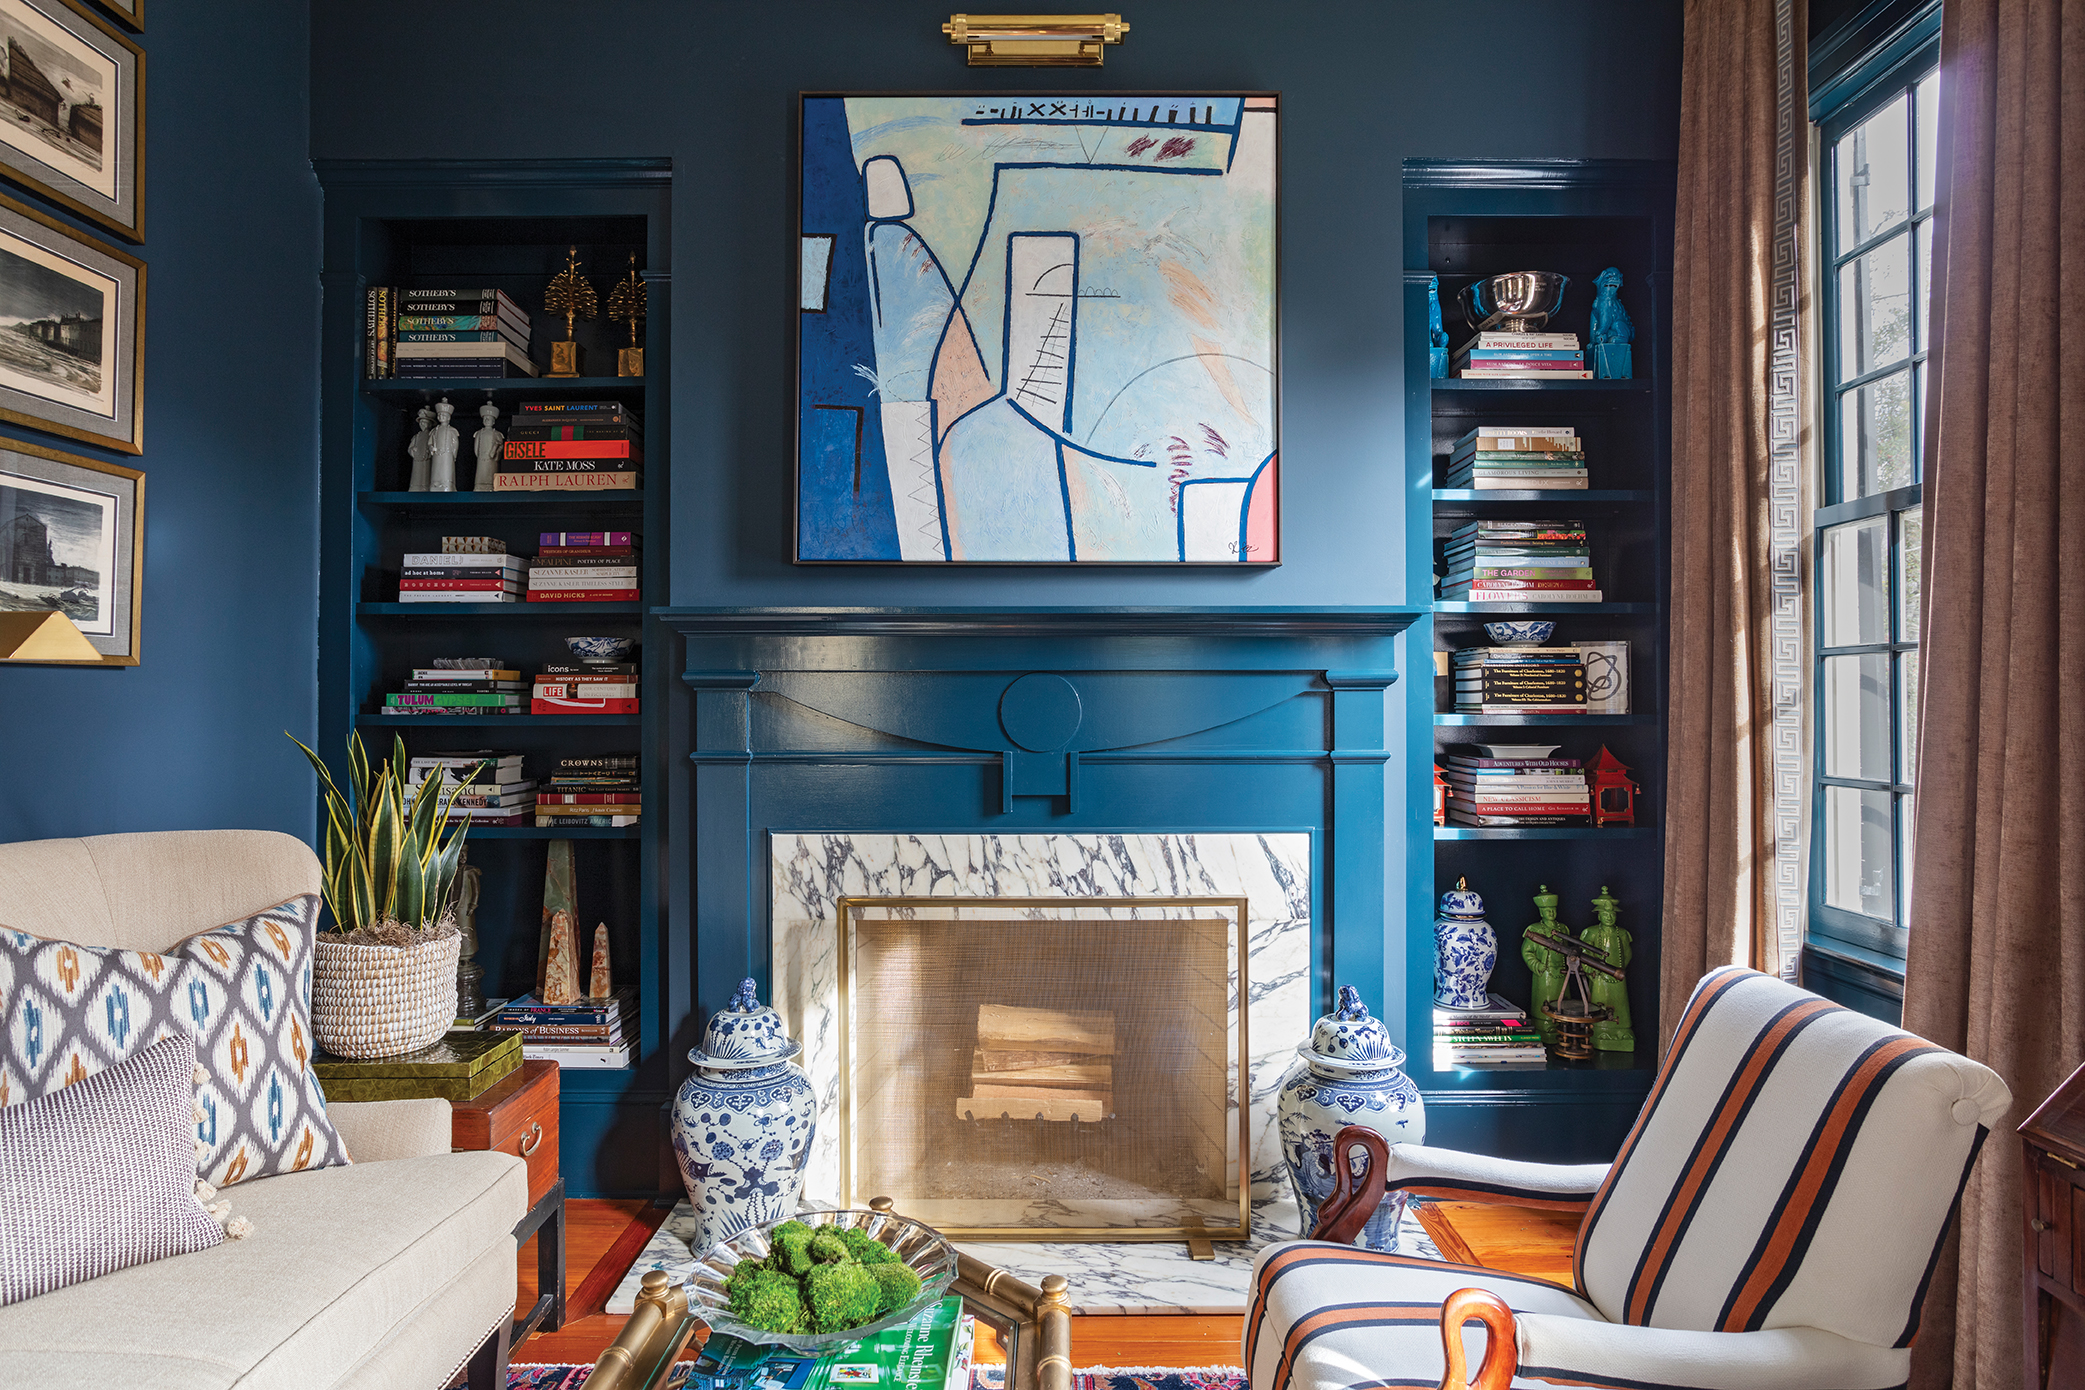 Abstract art, and bold paint colors, like Farrow &amp; Ball “Hague Blue” in the living room, are juxtaposed with antique furnishings.“Brown furniture is very stuffy in general so you have to balance it,” says John.